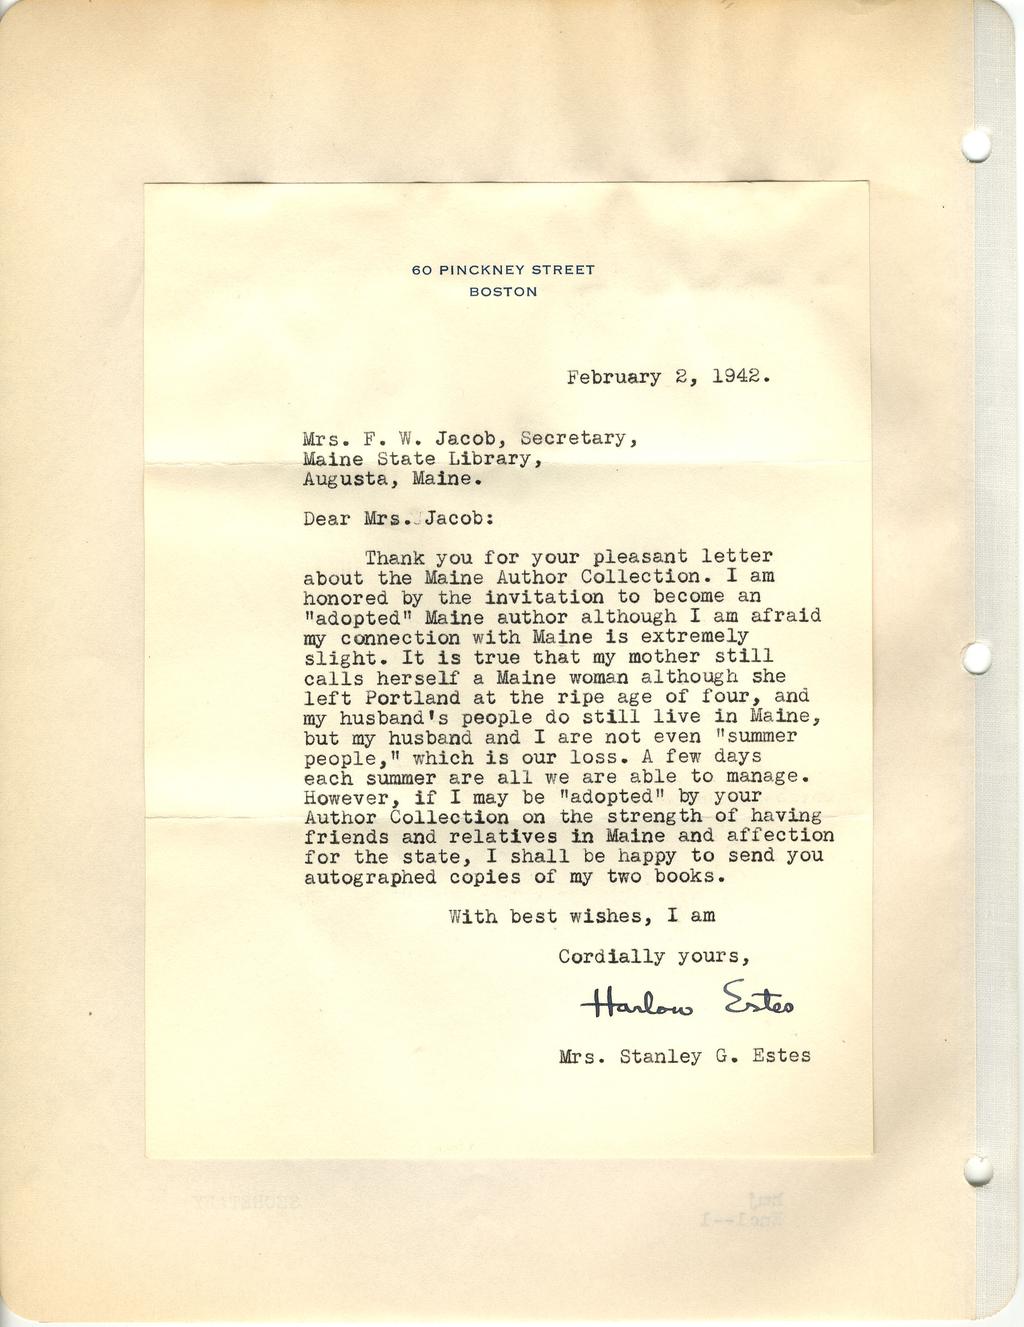 60 PINCKNEY STREET BOSTON February 2, 1942. Mrs. F. W. Jacob, Secretary, Maine State Library, Augusta, Maine. Dear Mrs.. Jacob: Thank you for your pleasant letter about the Maine Author Collection.